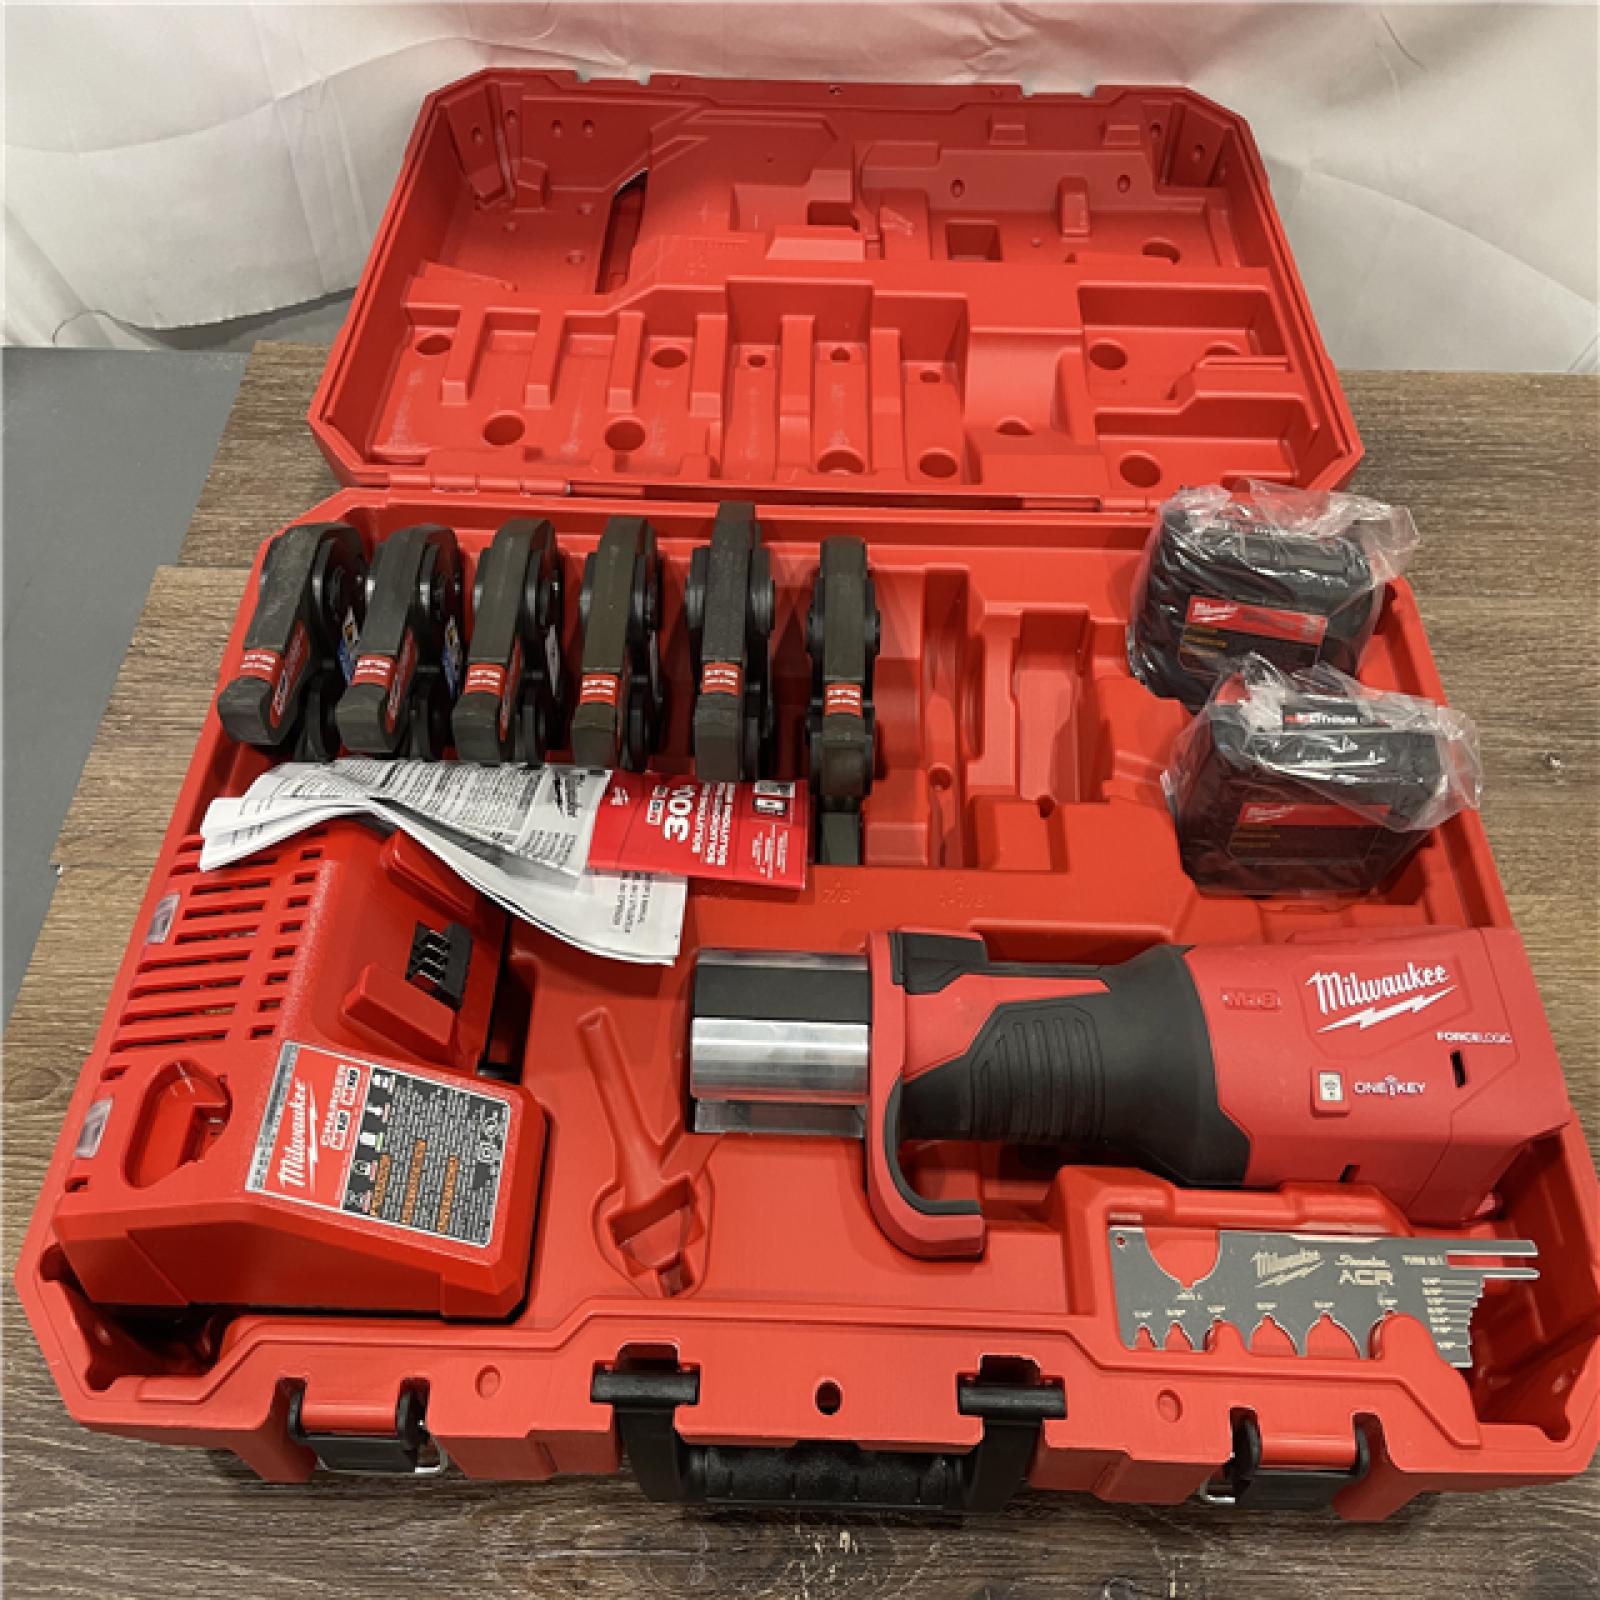 Milwaukee 2922-22M M18 FORCE LOGIC Press Tool Kit W/ One-Key with 1/4 -7/8  Streamline ACR Jaws Appears in good condition